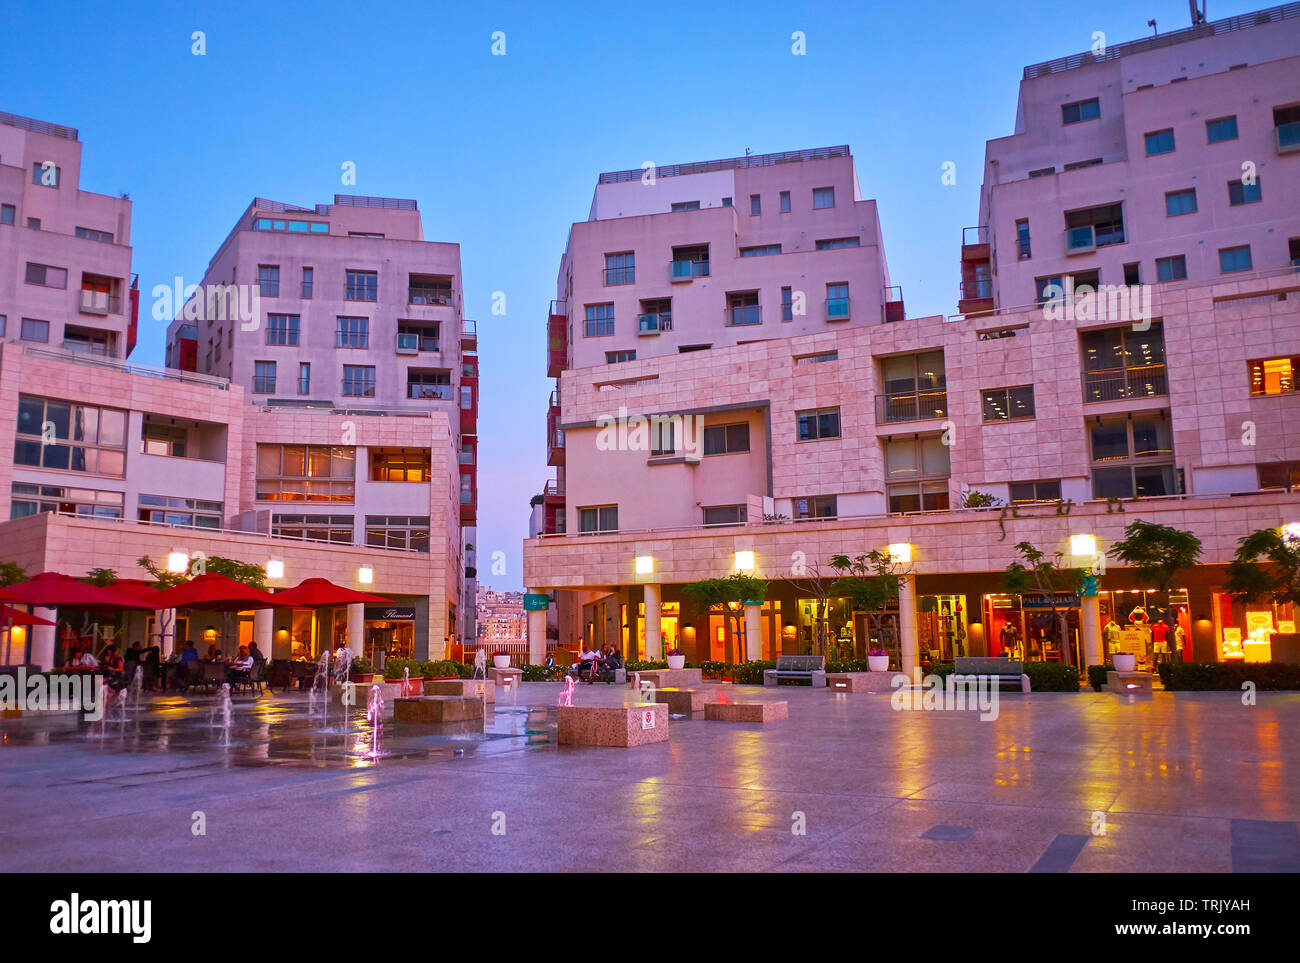 SLIEMA, MALTA - JUNE 19, 2018: Visit modern Tigne Point shopping mall, including nice cafes and restaurants, located in the scenic square, on June 19 Stock Photo